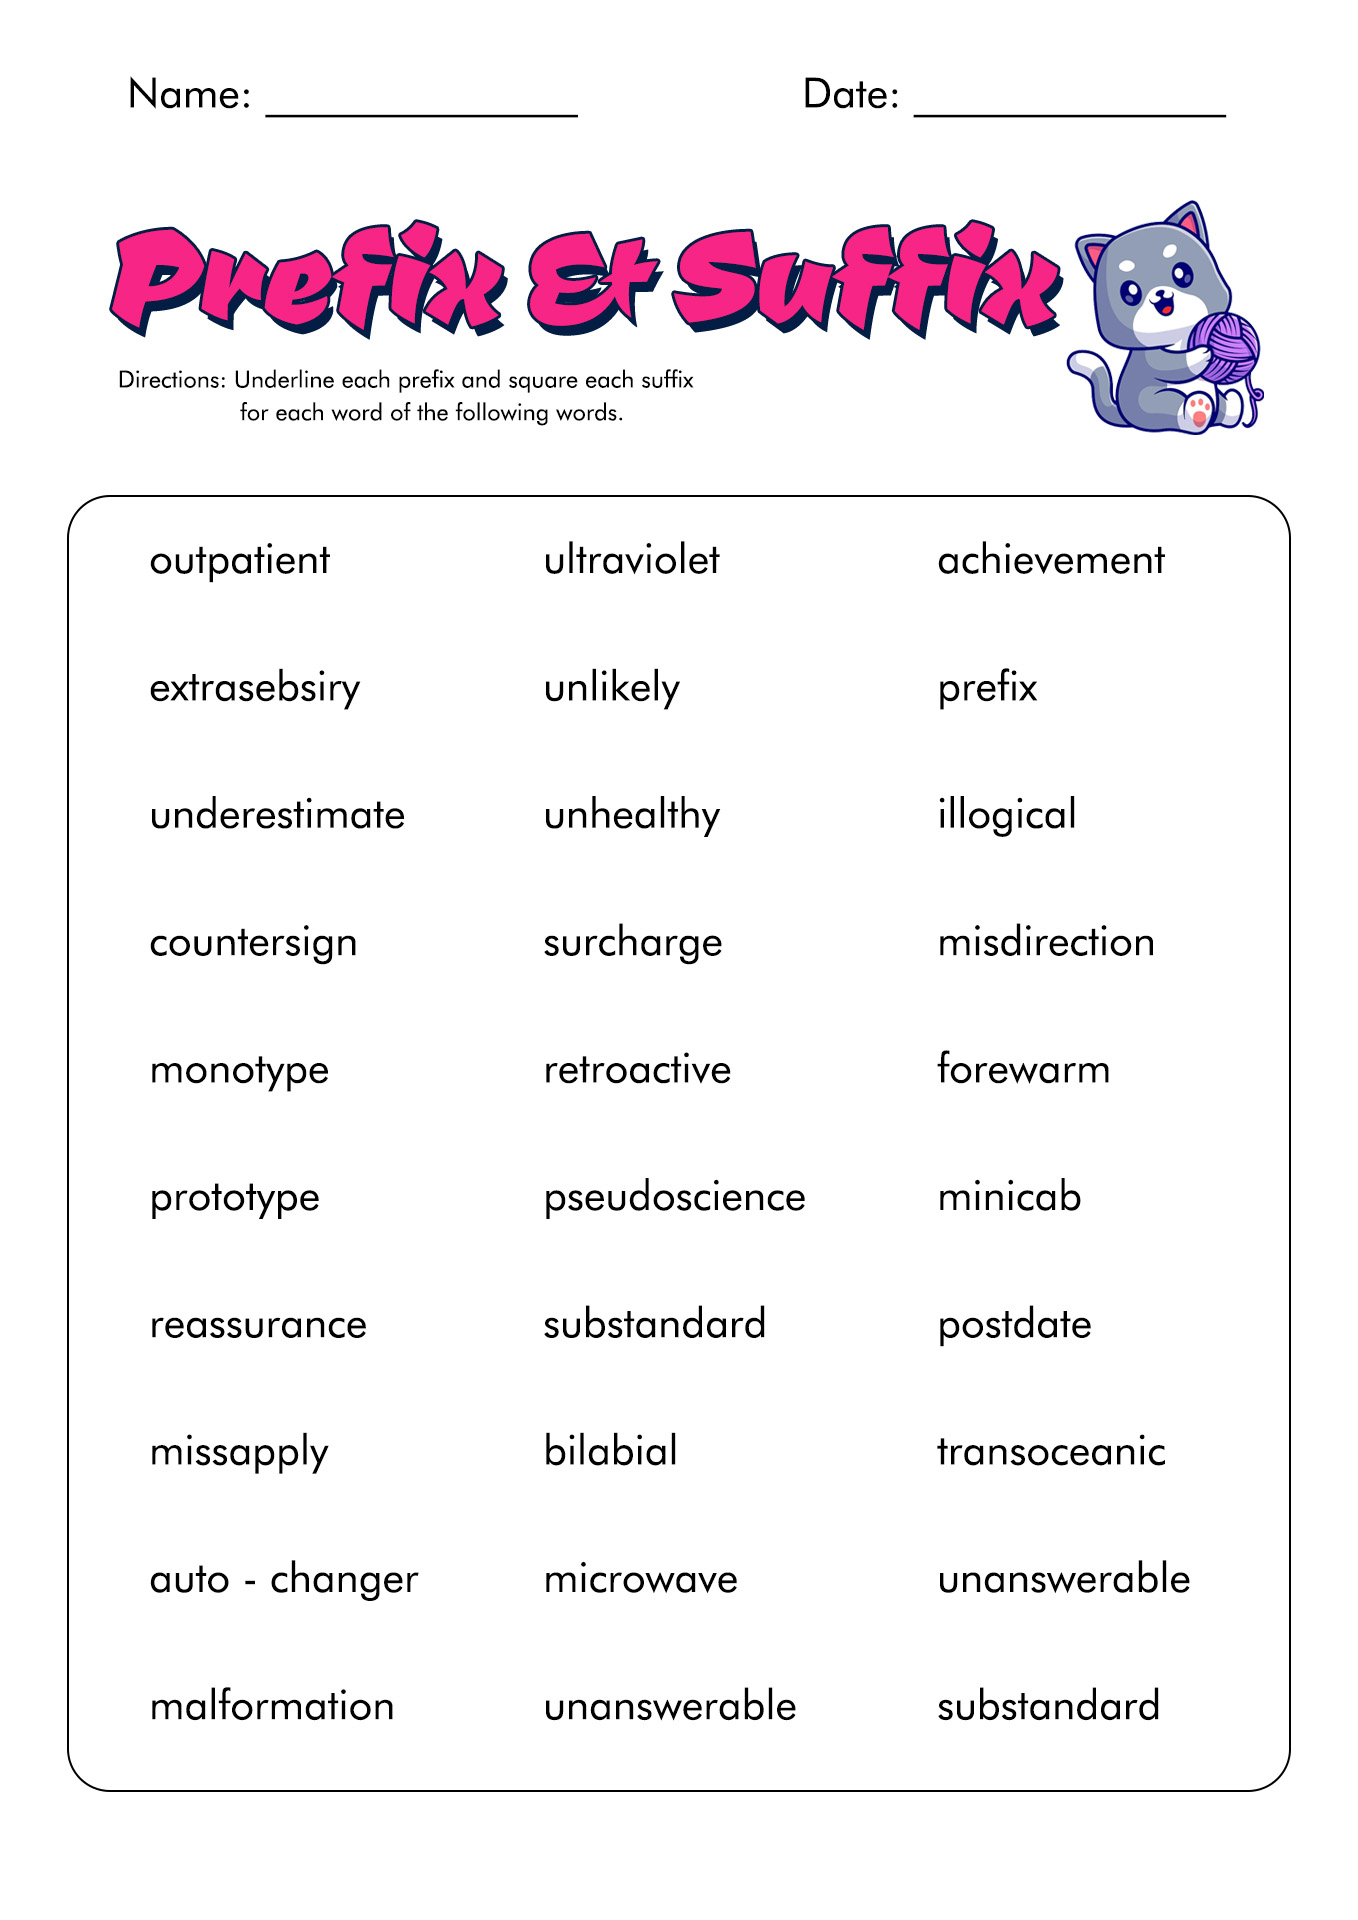 roots-and-affixes-worksheet